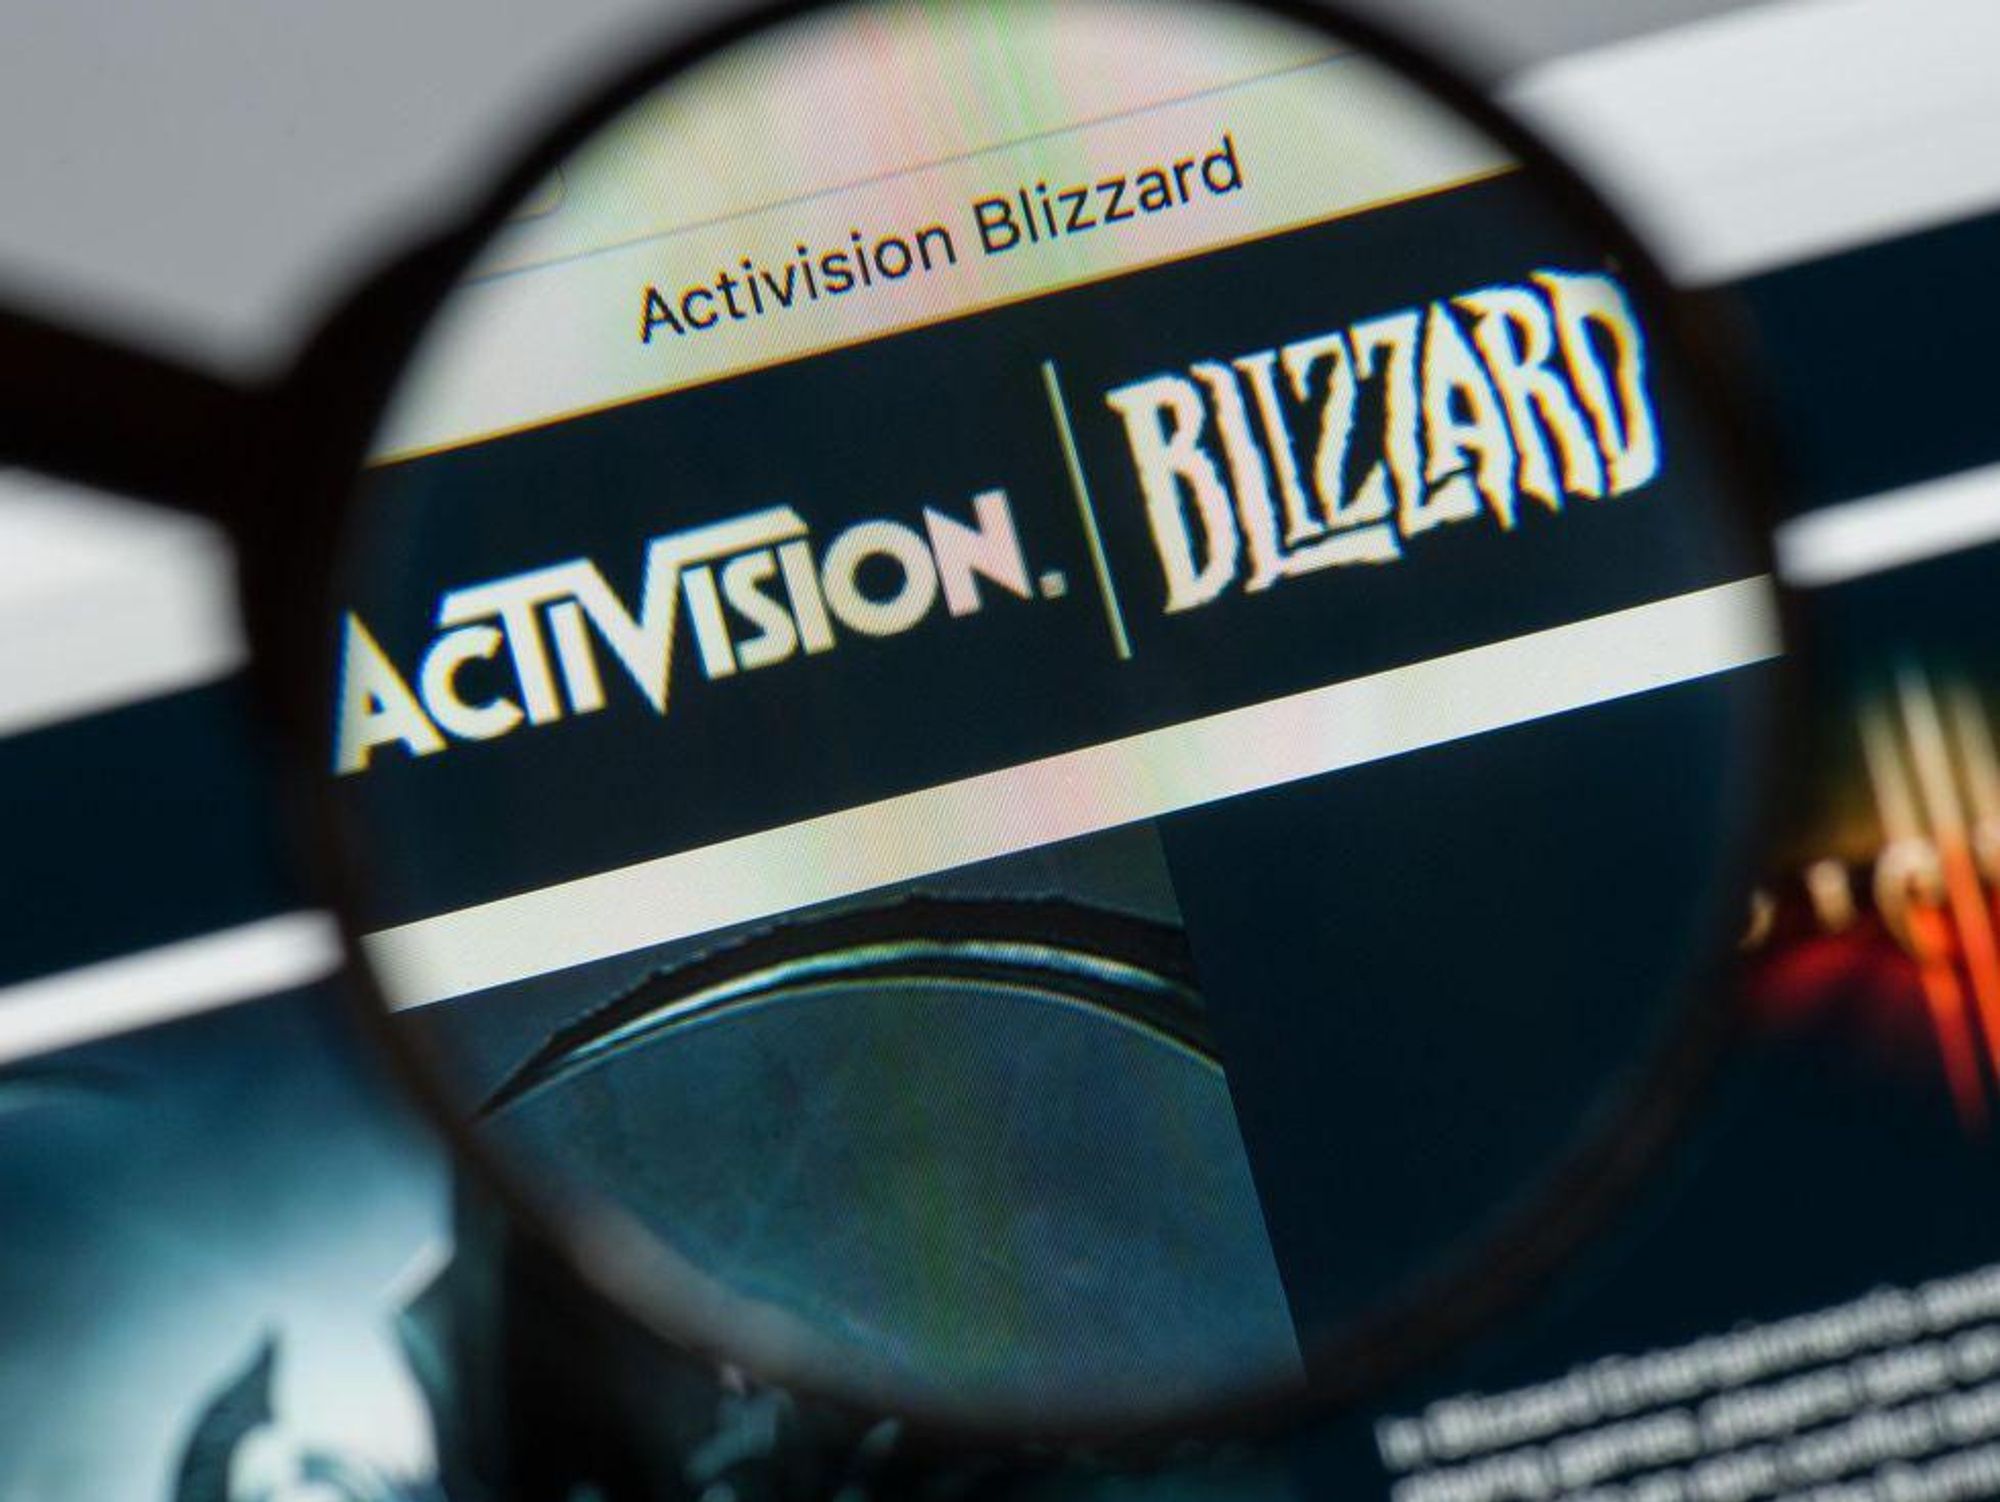 Workers at Activision Blizzard Studio Raven Software Walk Out, Protesting Layoffs